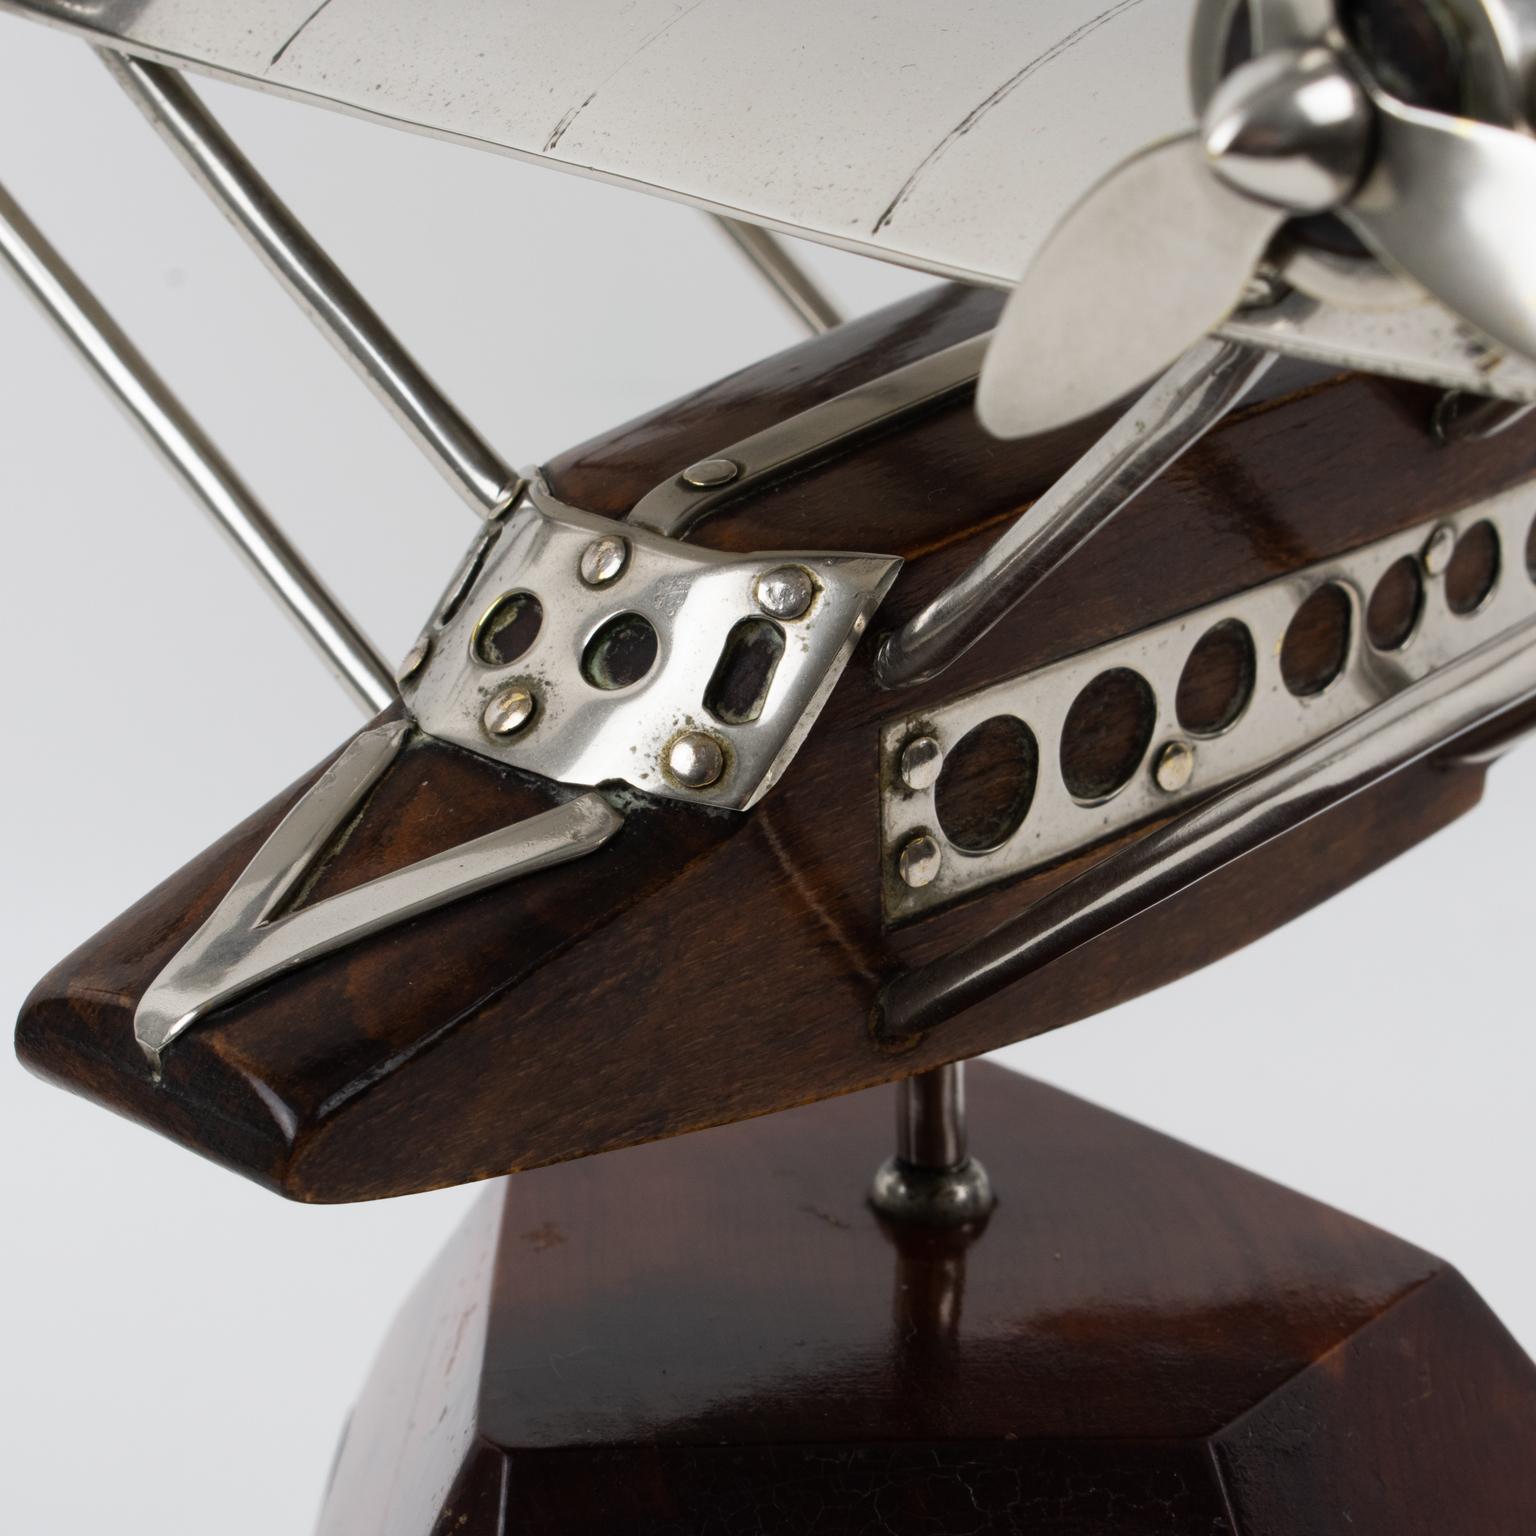 French Art Deco Wood and Chrome Airplane SeaPlane Aviation Model, 1940s For Sale 8